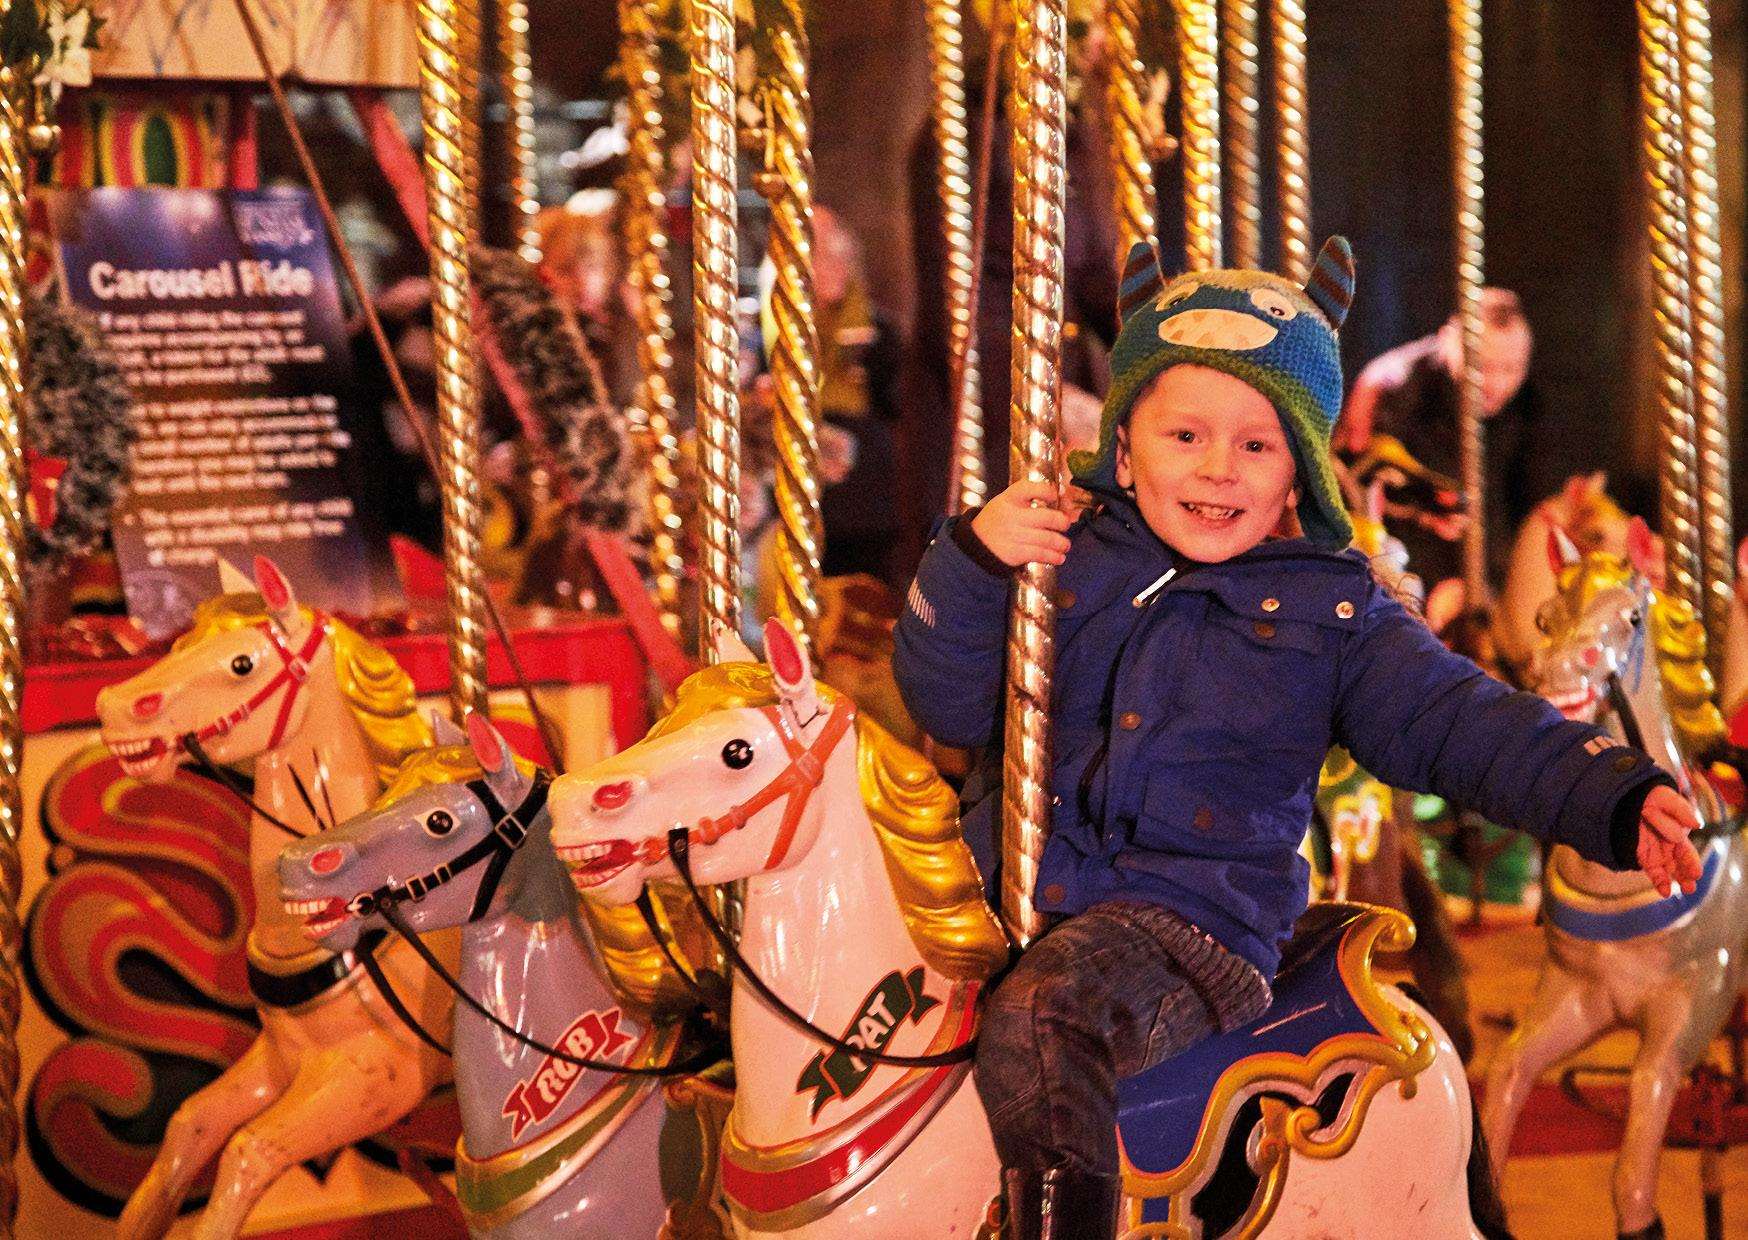 There will be a vintage carousel at Bedgebury this Christmas